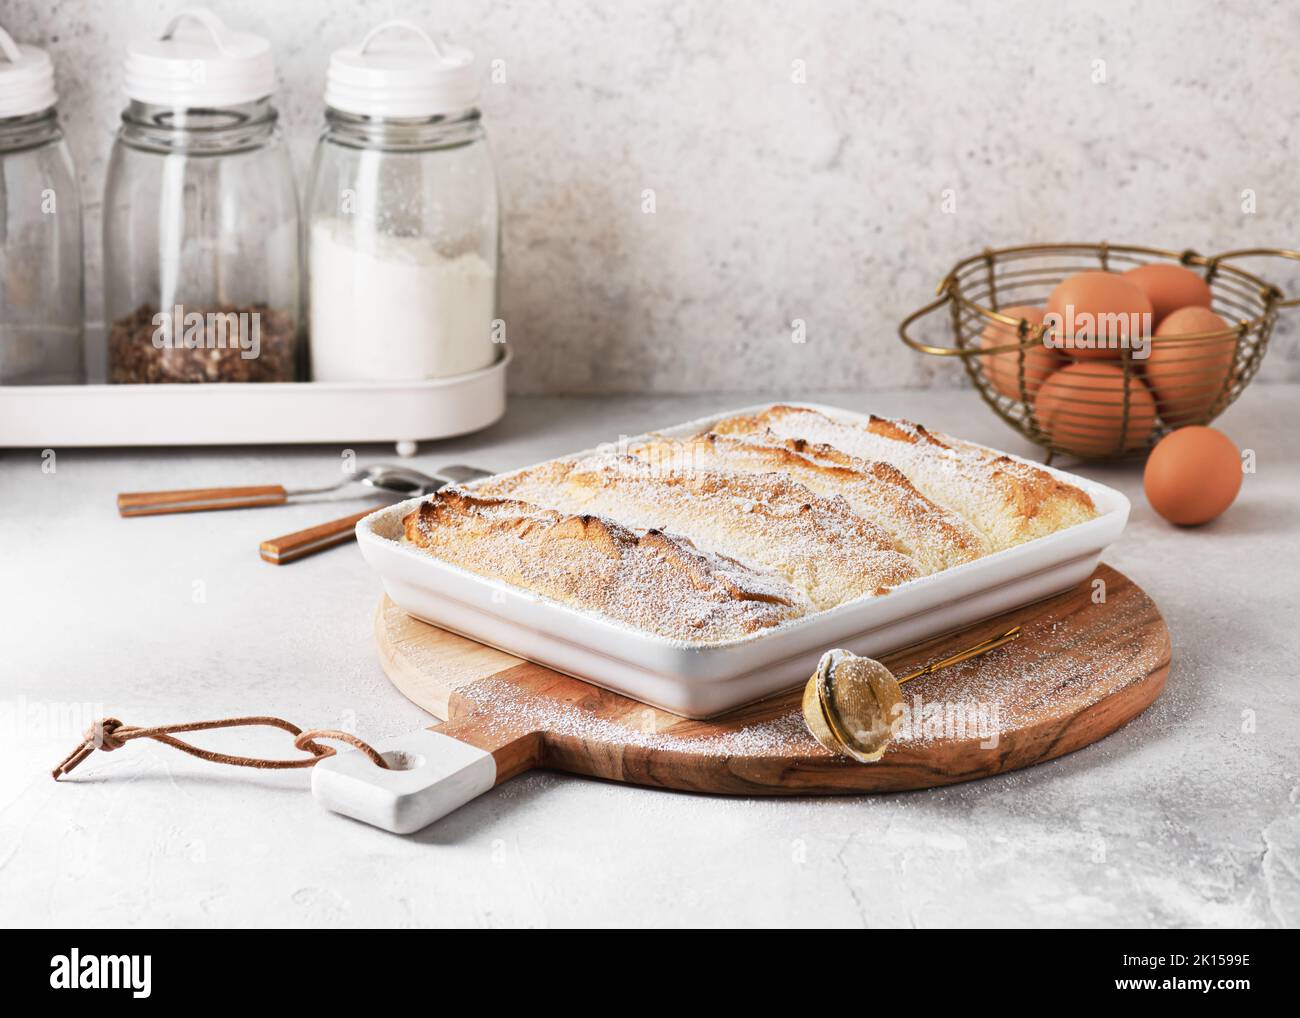 Delicious egg soufflé called Salzburger Nockerl, traditionel  Austrian speciality. Homed sweet food concept. Copy space. Stock Photo